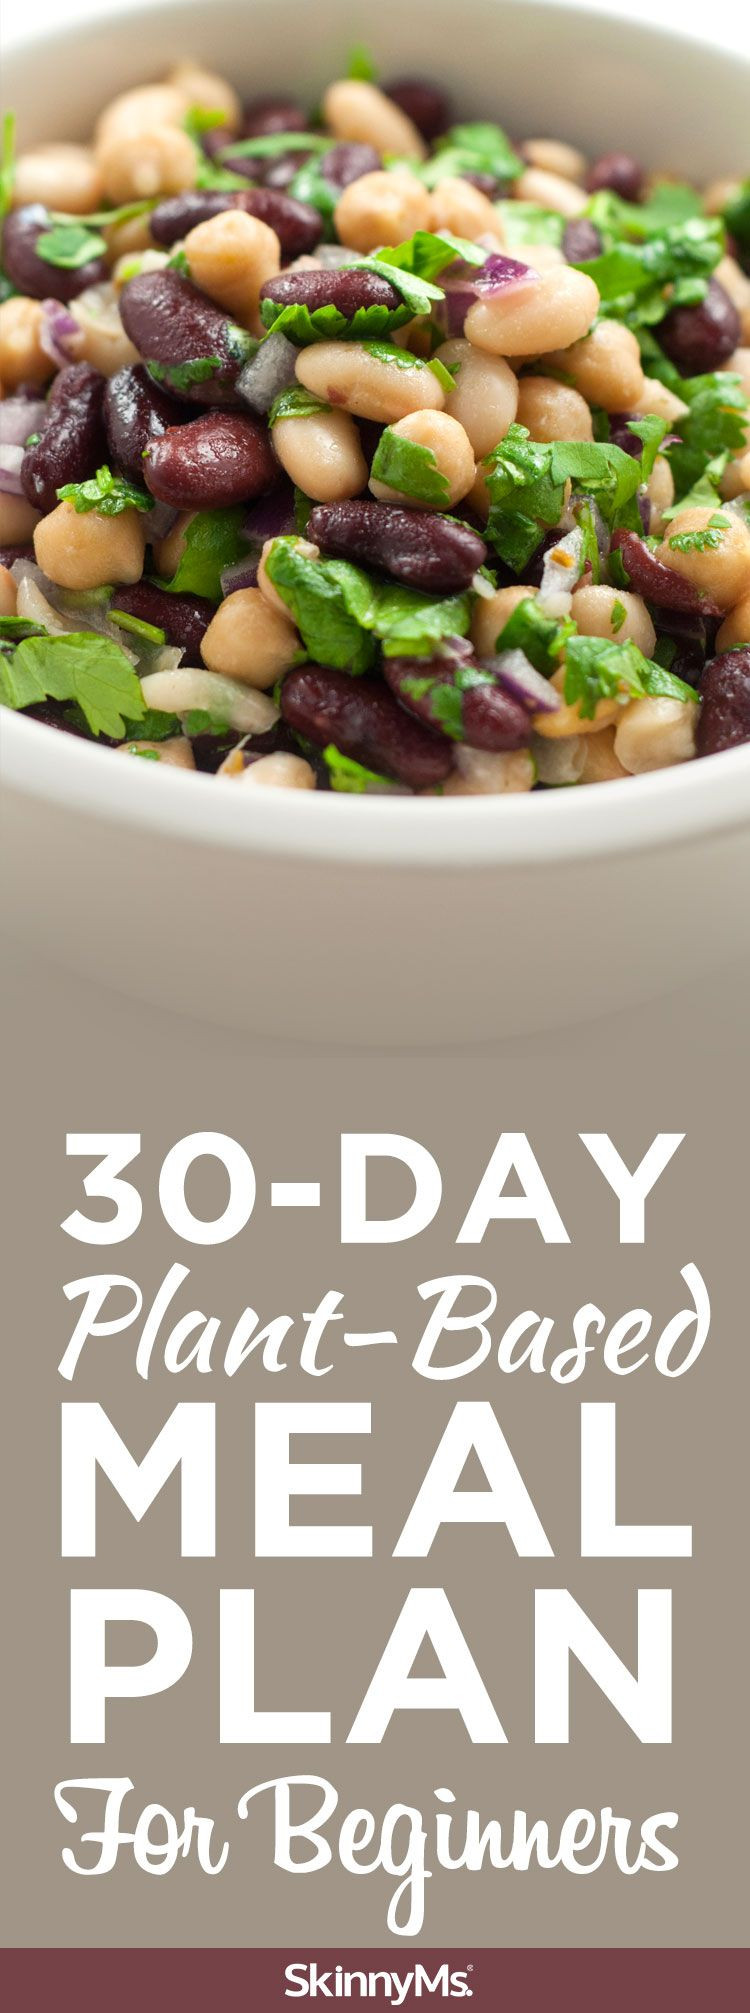 Plant Based Diet Meal Plan For Beginners
 30 Day Plant Based Meal Plan For Beginners